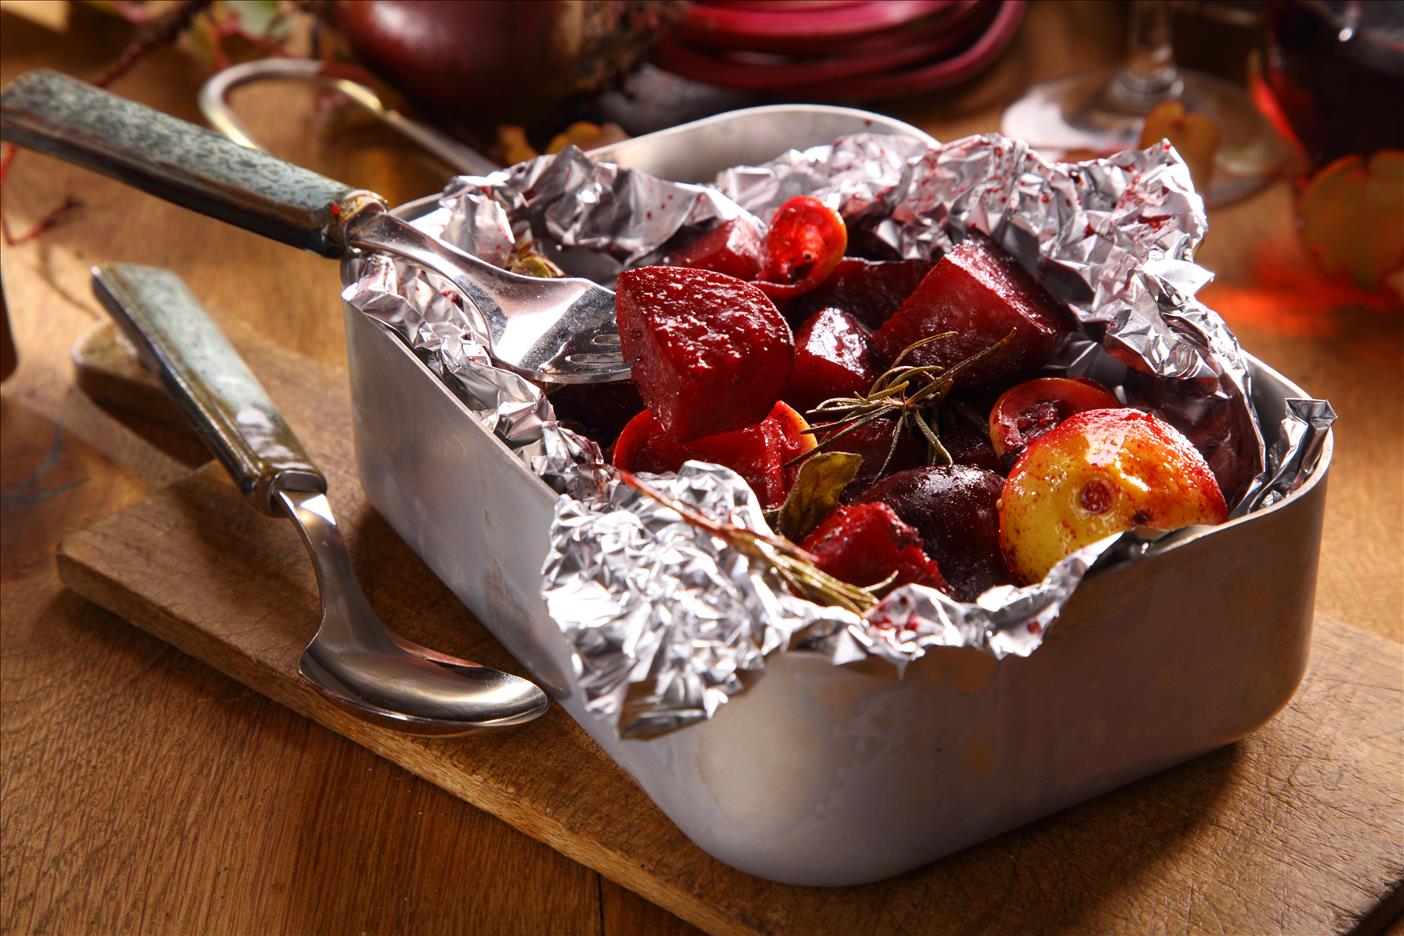 Why You Shouldn't Wrap Your Food In Aluminium Foil Before Cooking It